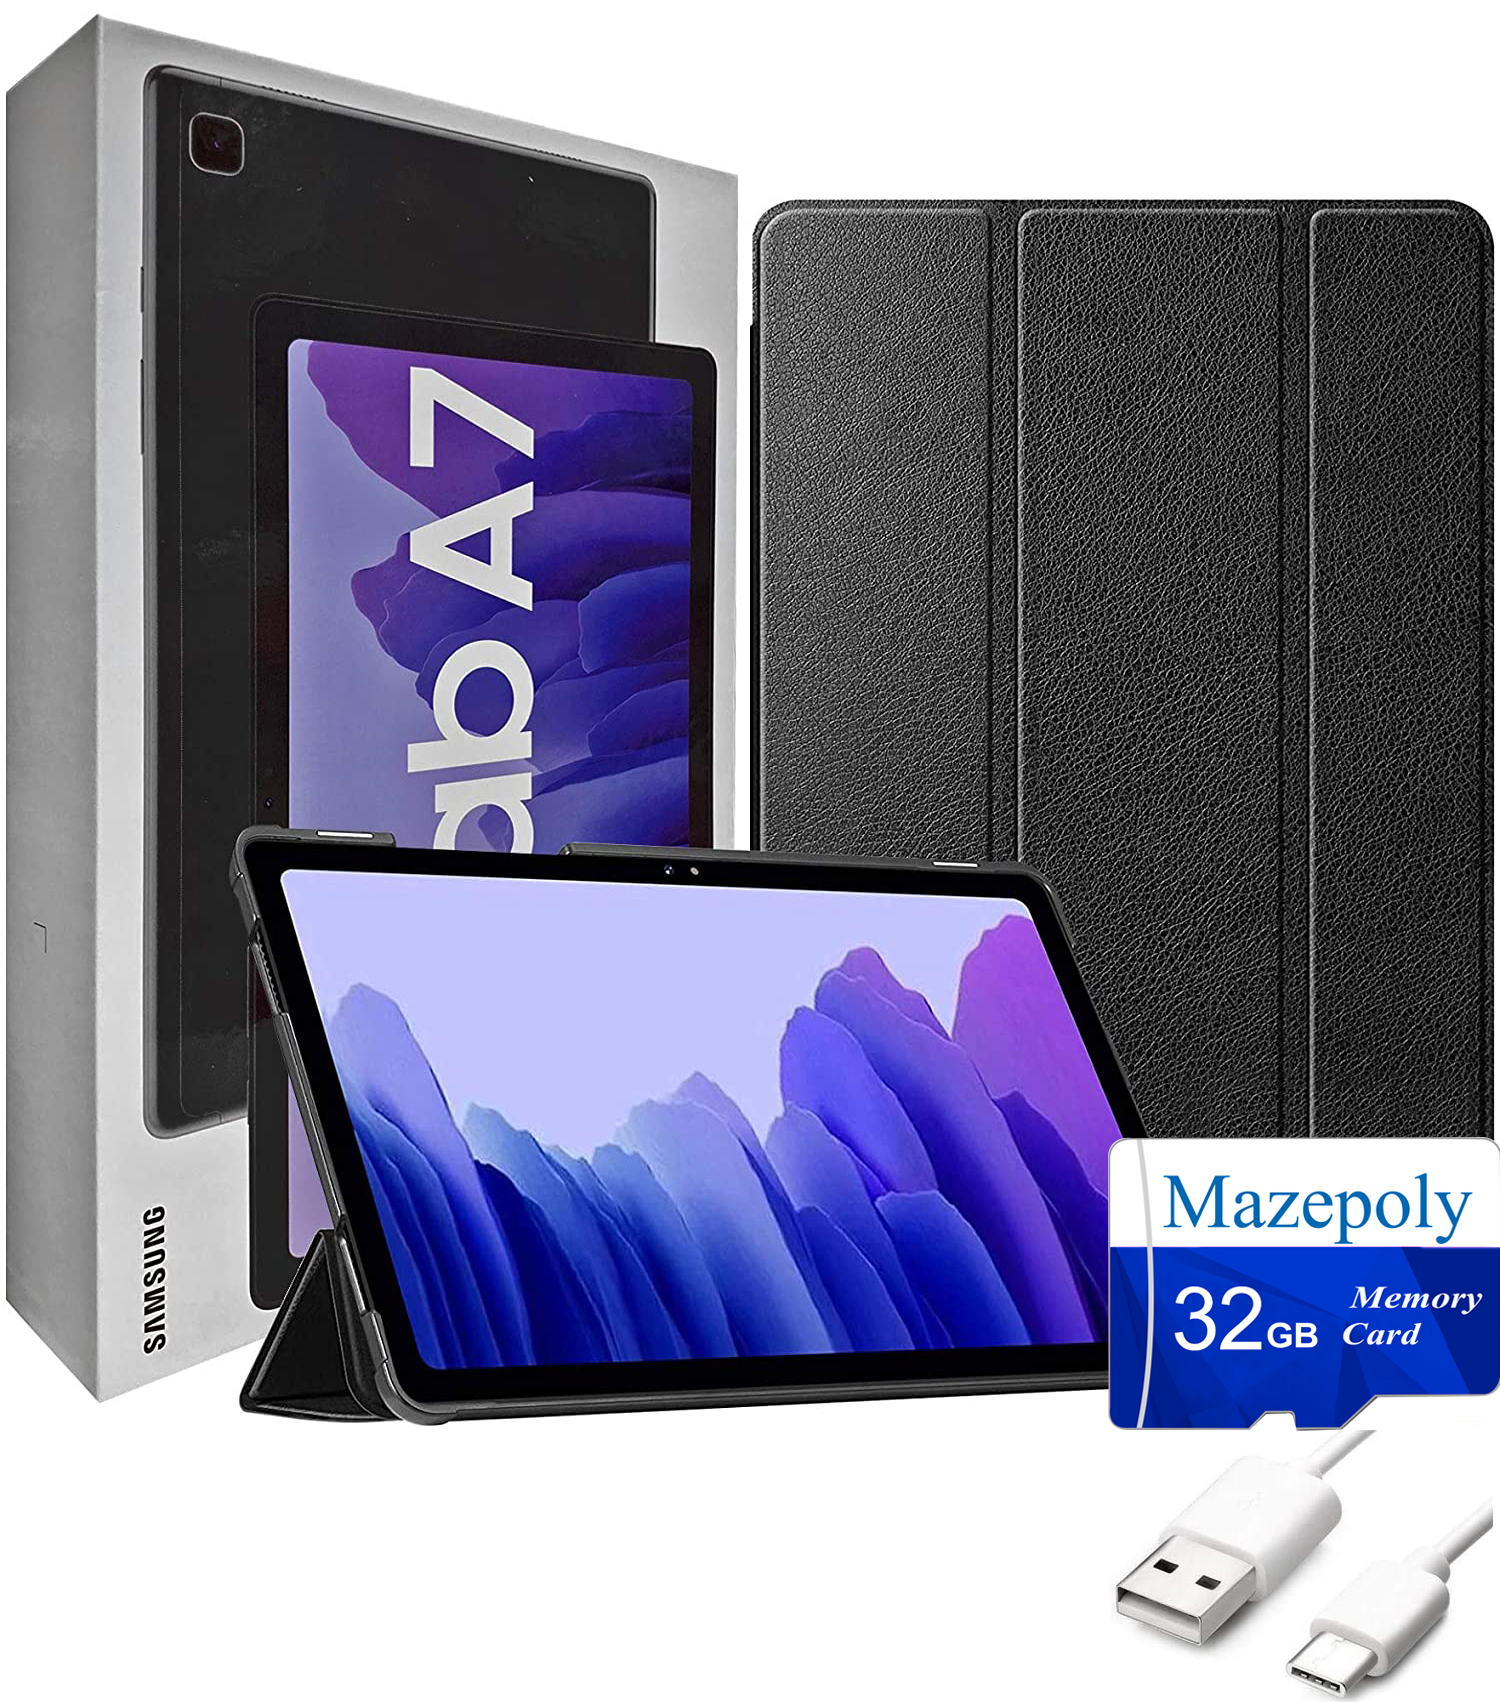 2021 Samsung Galaxy Tab A7 10.4'' Inch 32 GB Wi-Fi Android 10 Touchscreen International Tablet (Gray) Bundle –Mazepoly Slim Trifold Hard Shell Case, Mazepoly 32GB Memory Card and USB Type C Cable - image 1 of 9